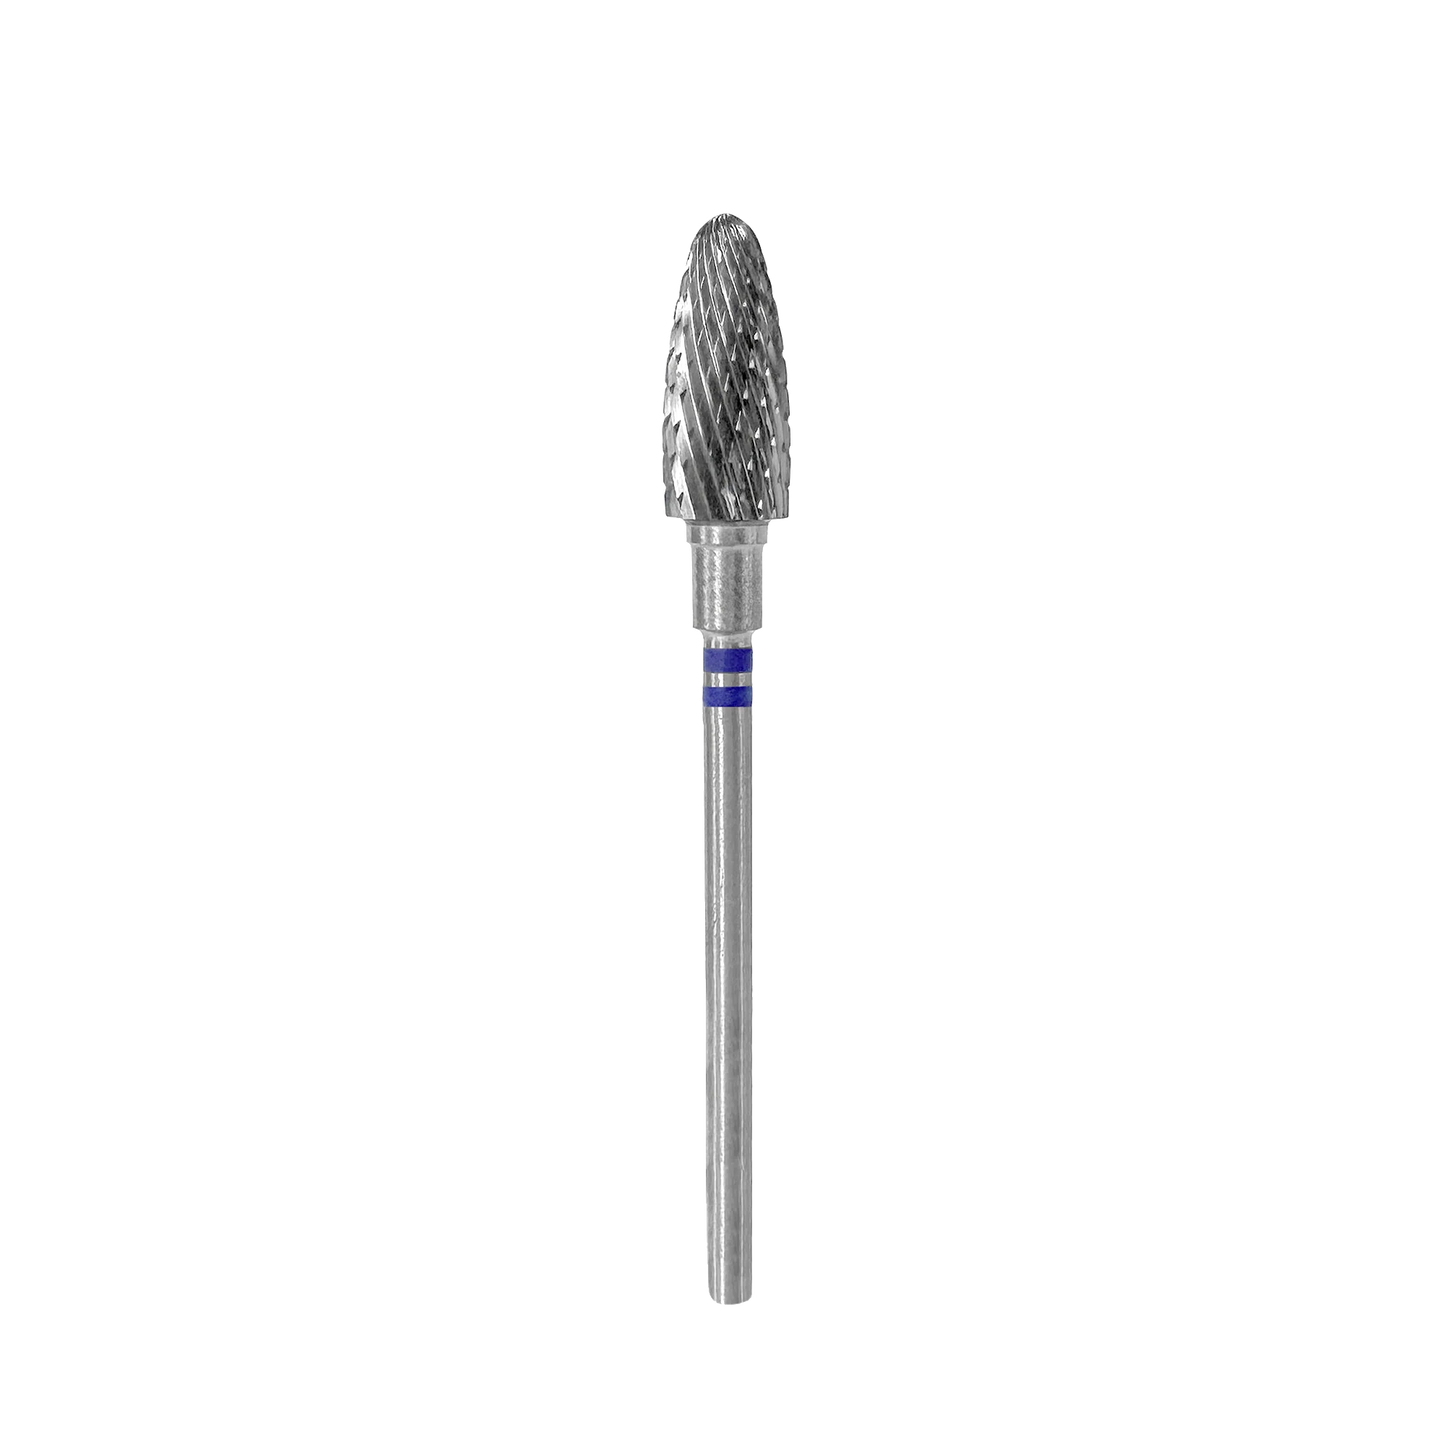 Carbide Nail Drill Bit For Left-Handed Users, "Corn", Blue, 6 mm/14 mm -FT91B060/14